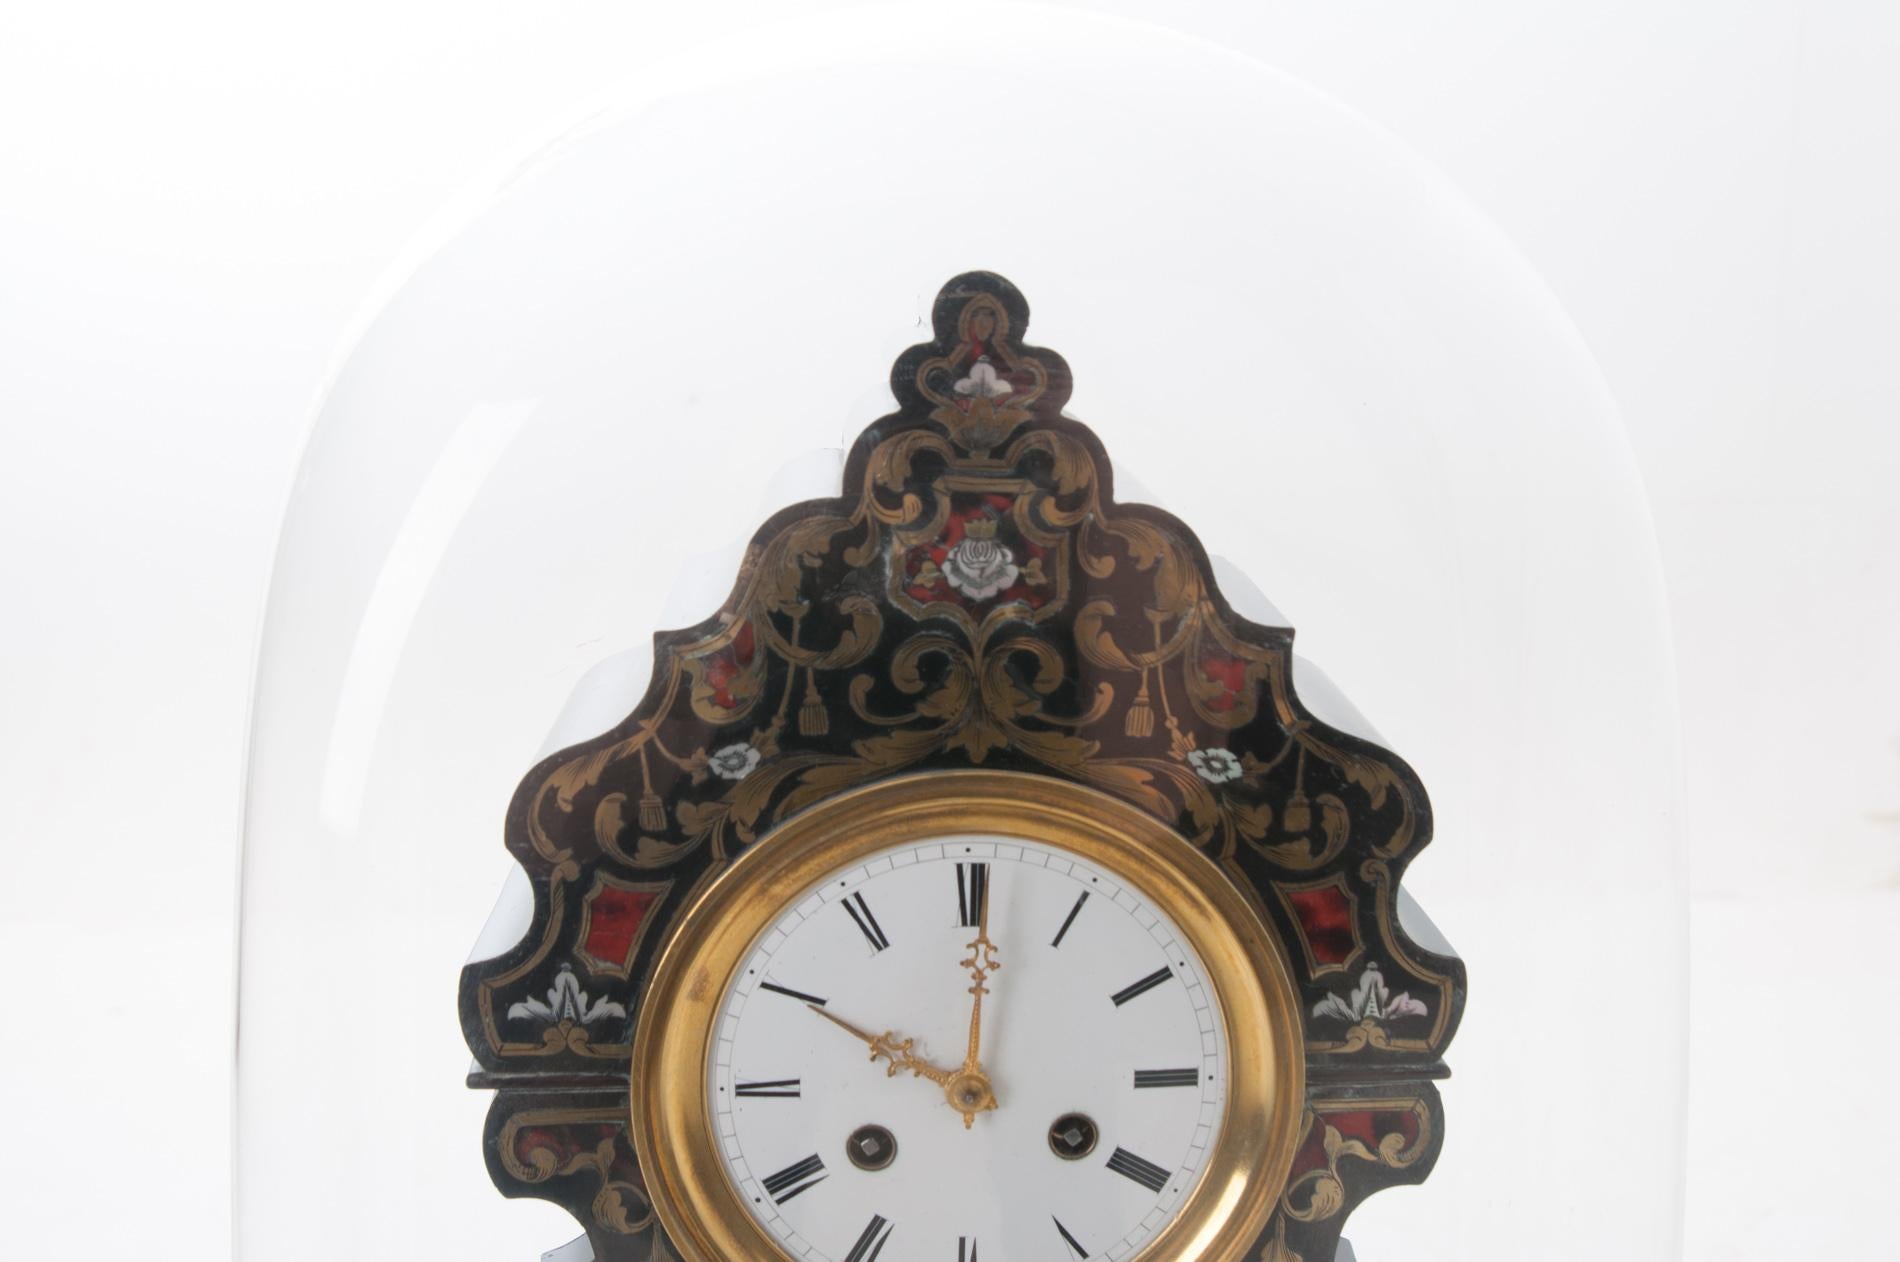 An absolutely stunning antique French boulle-work table clock on a domed Stand, circa 1840s. In the manner of André Charles Boulle, it is ebonized and inlaid with mother of pearl, etched-brass and tortoiseshell under a hand-rolled glass dome. This